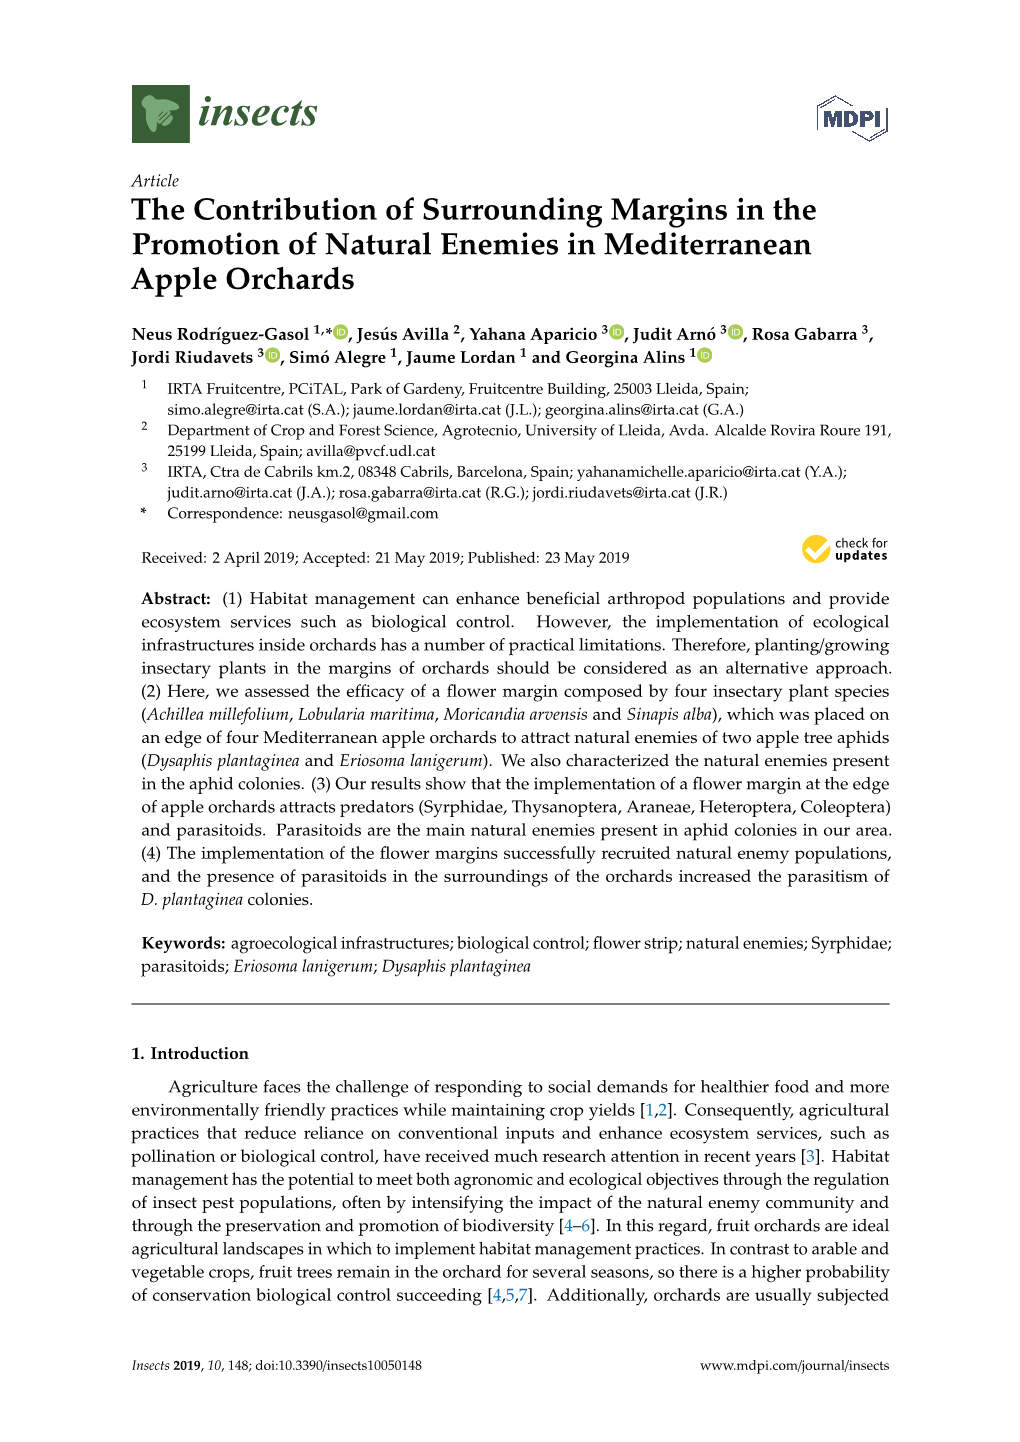 The Contribution of Surrounding Margins in the Promotion of Natural Enemies in Mediterranean Apple Orchards